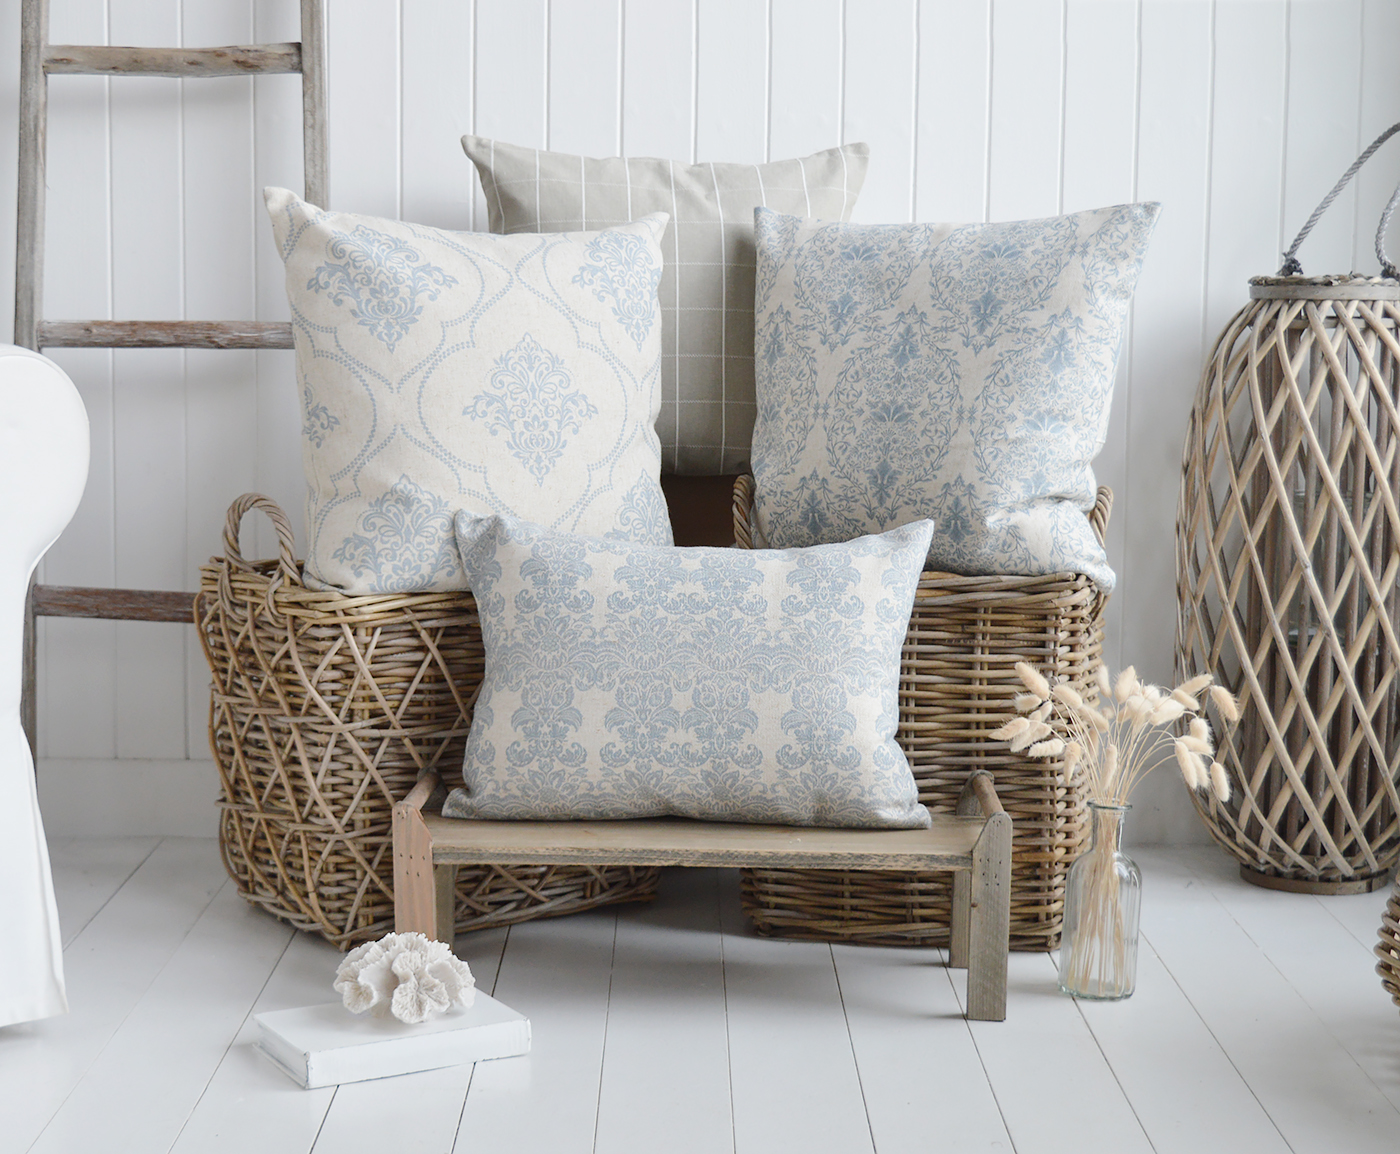 Bristol Ornate soft blue cushions - Luxury New England style cushions. Country, coastal and Modern Farmhouse homes and interiors